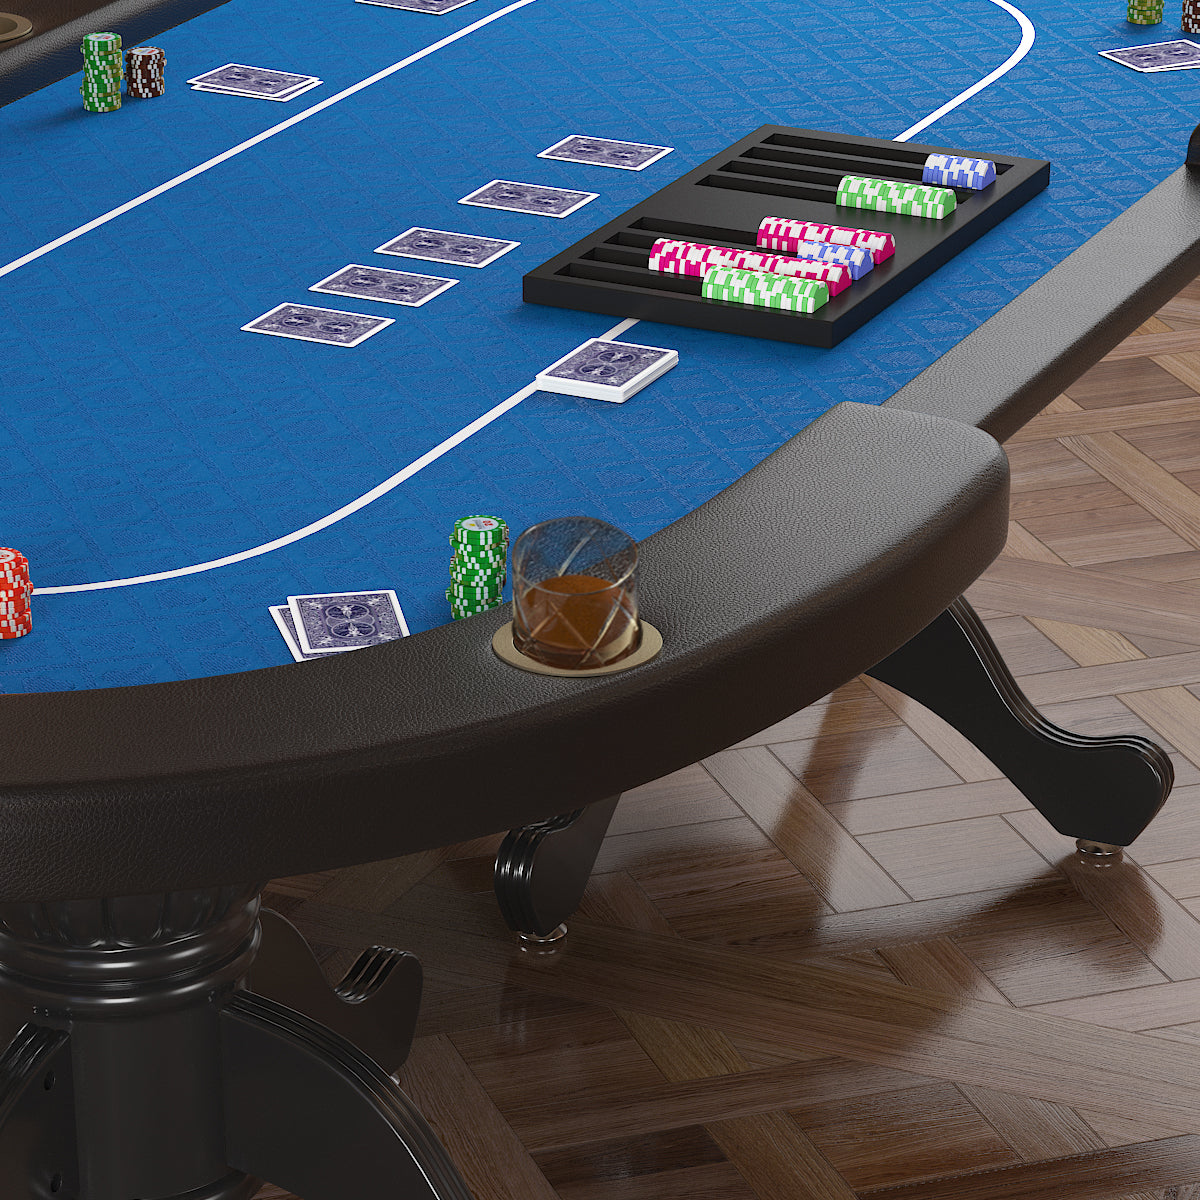 96" Aura Poker Table with Thickened Armrest Jumbo Cup Holders Bet line